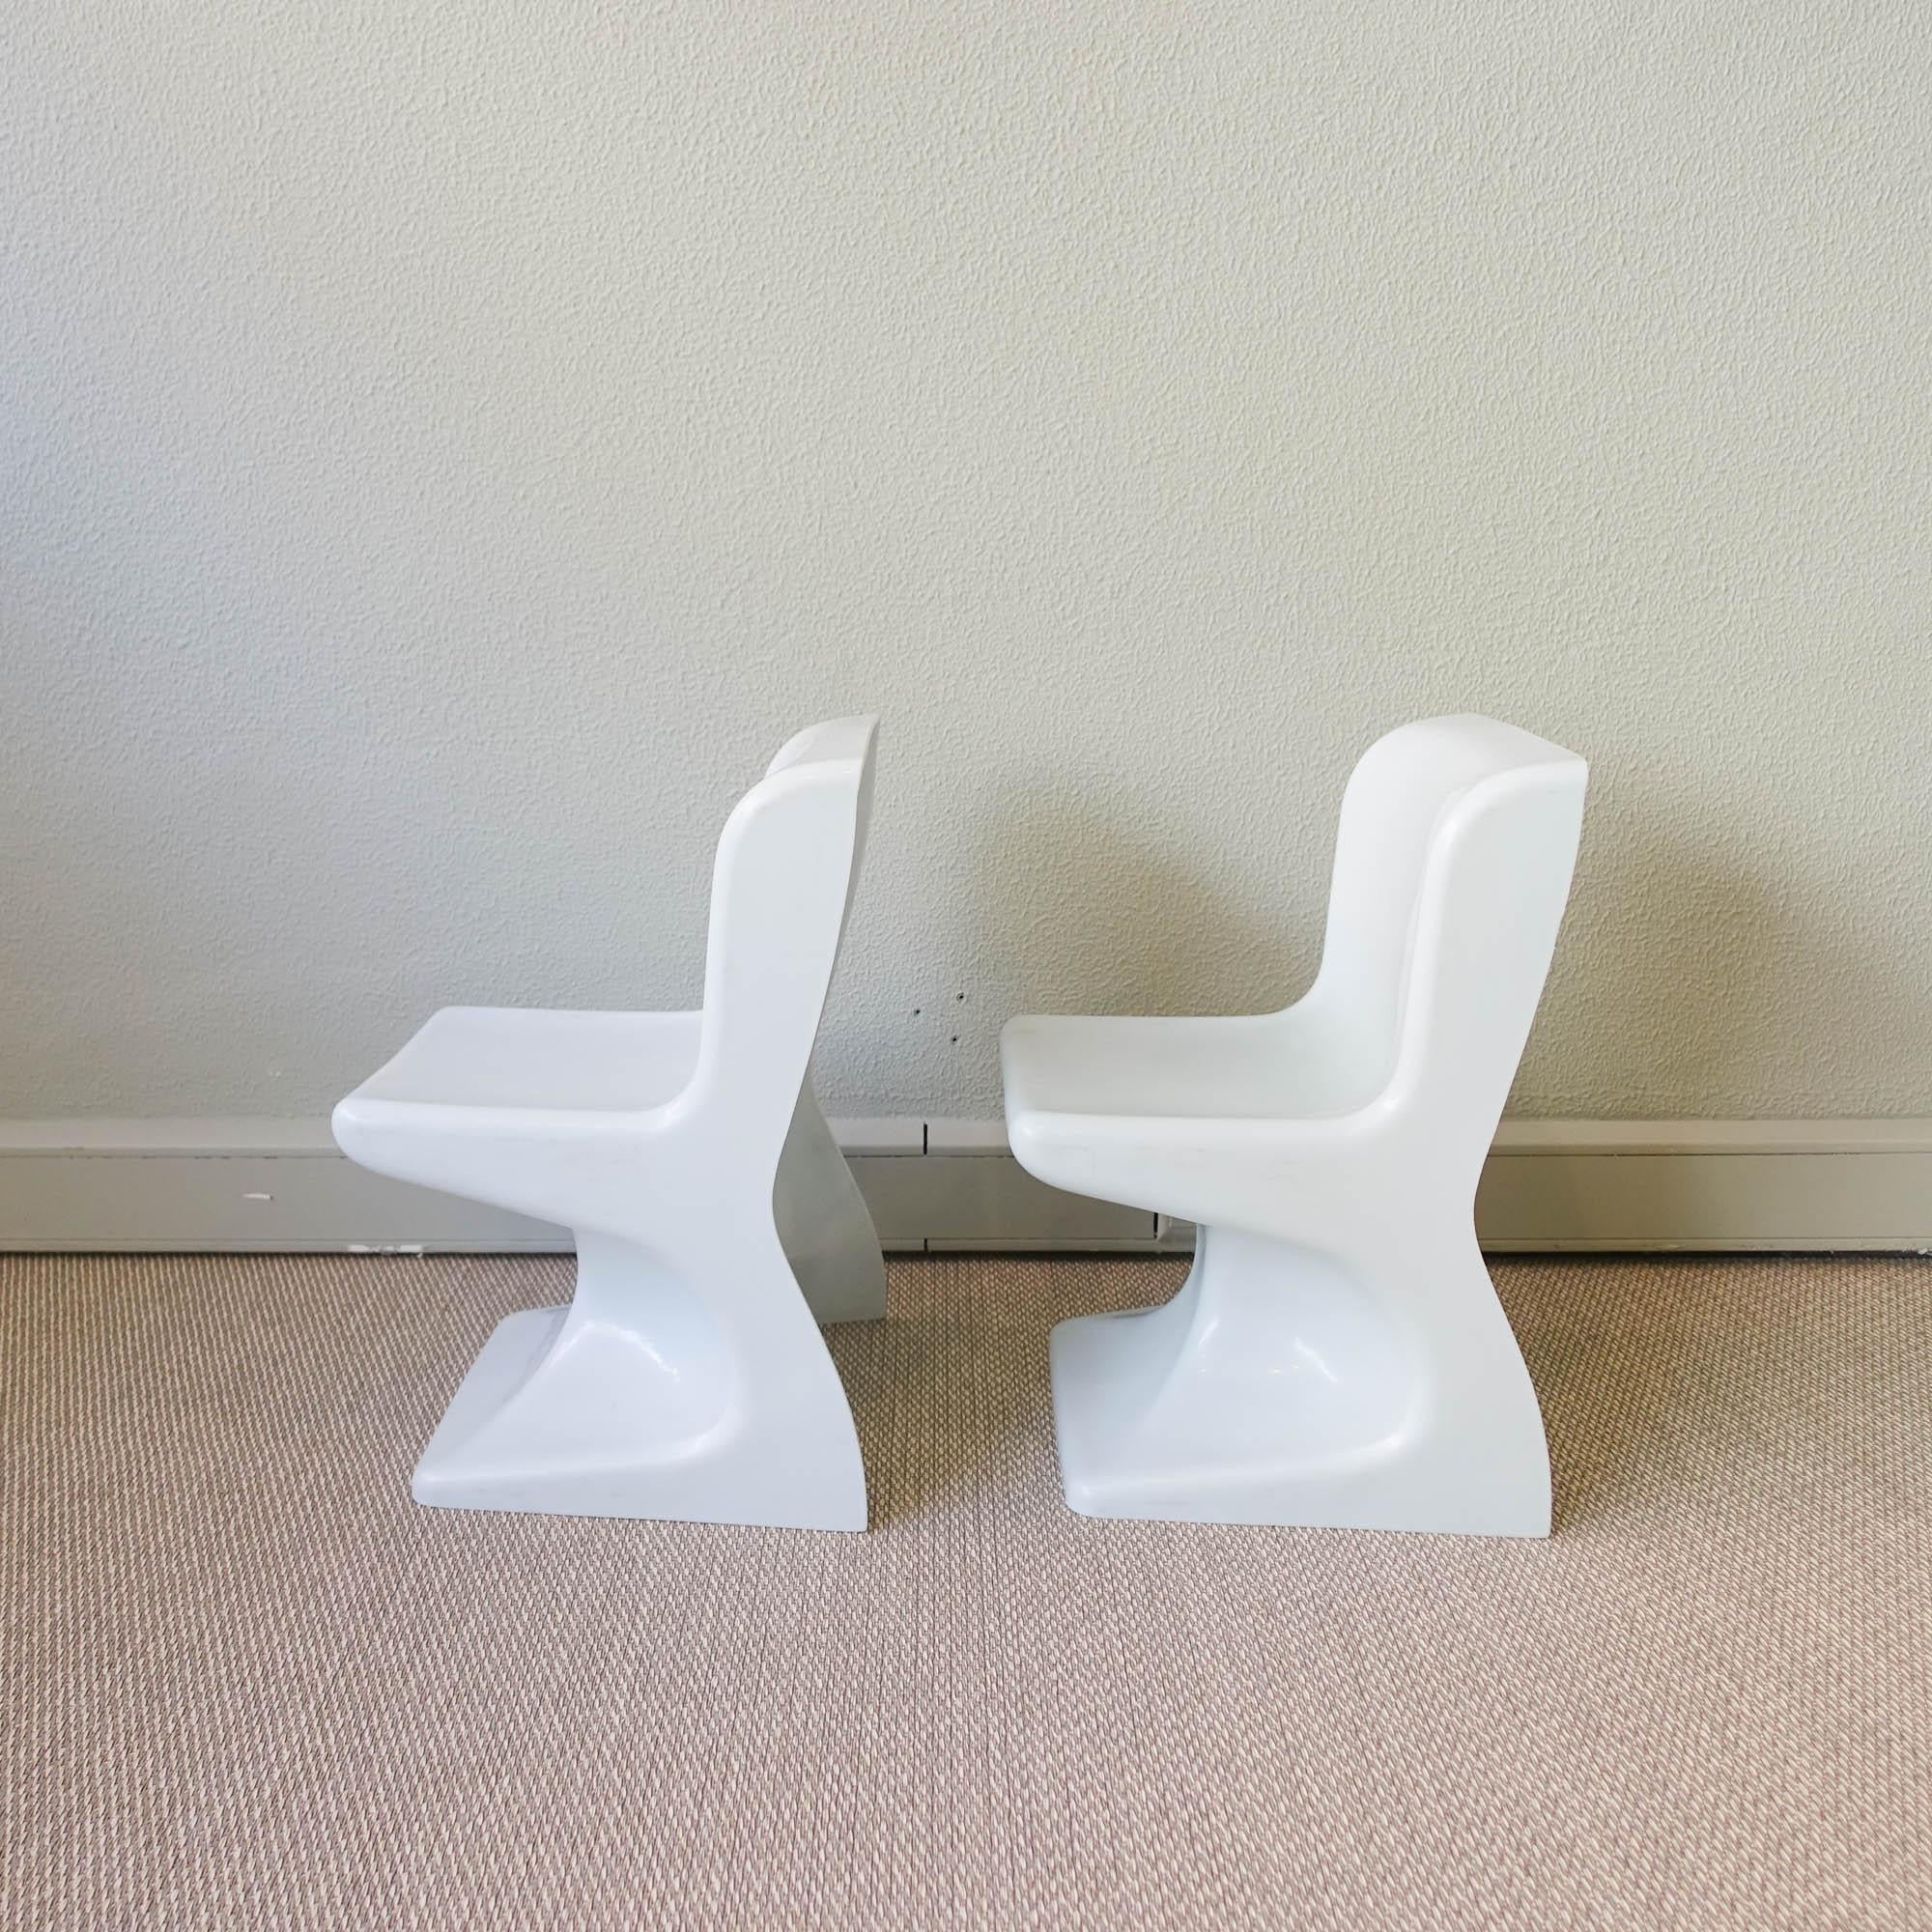 This pair of children's chairs was designed by Patrick Gingembre for SELAP, in France during the 1970's. They are made of white molded plastic with an organic shape very characteristic of Pop Style and 